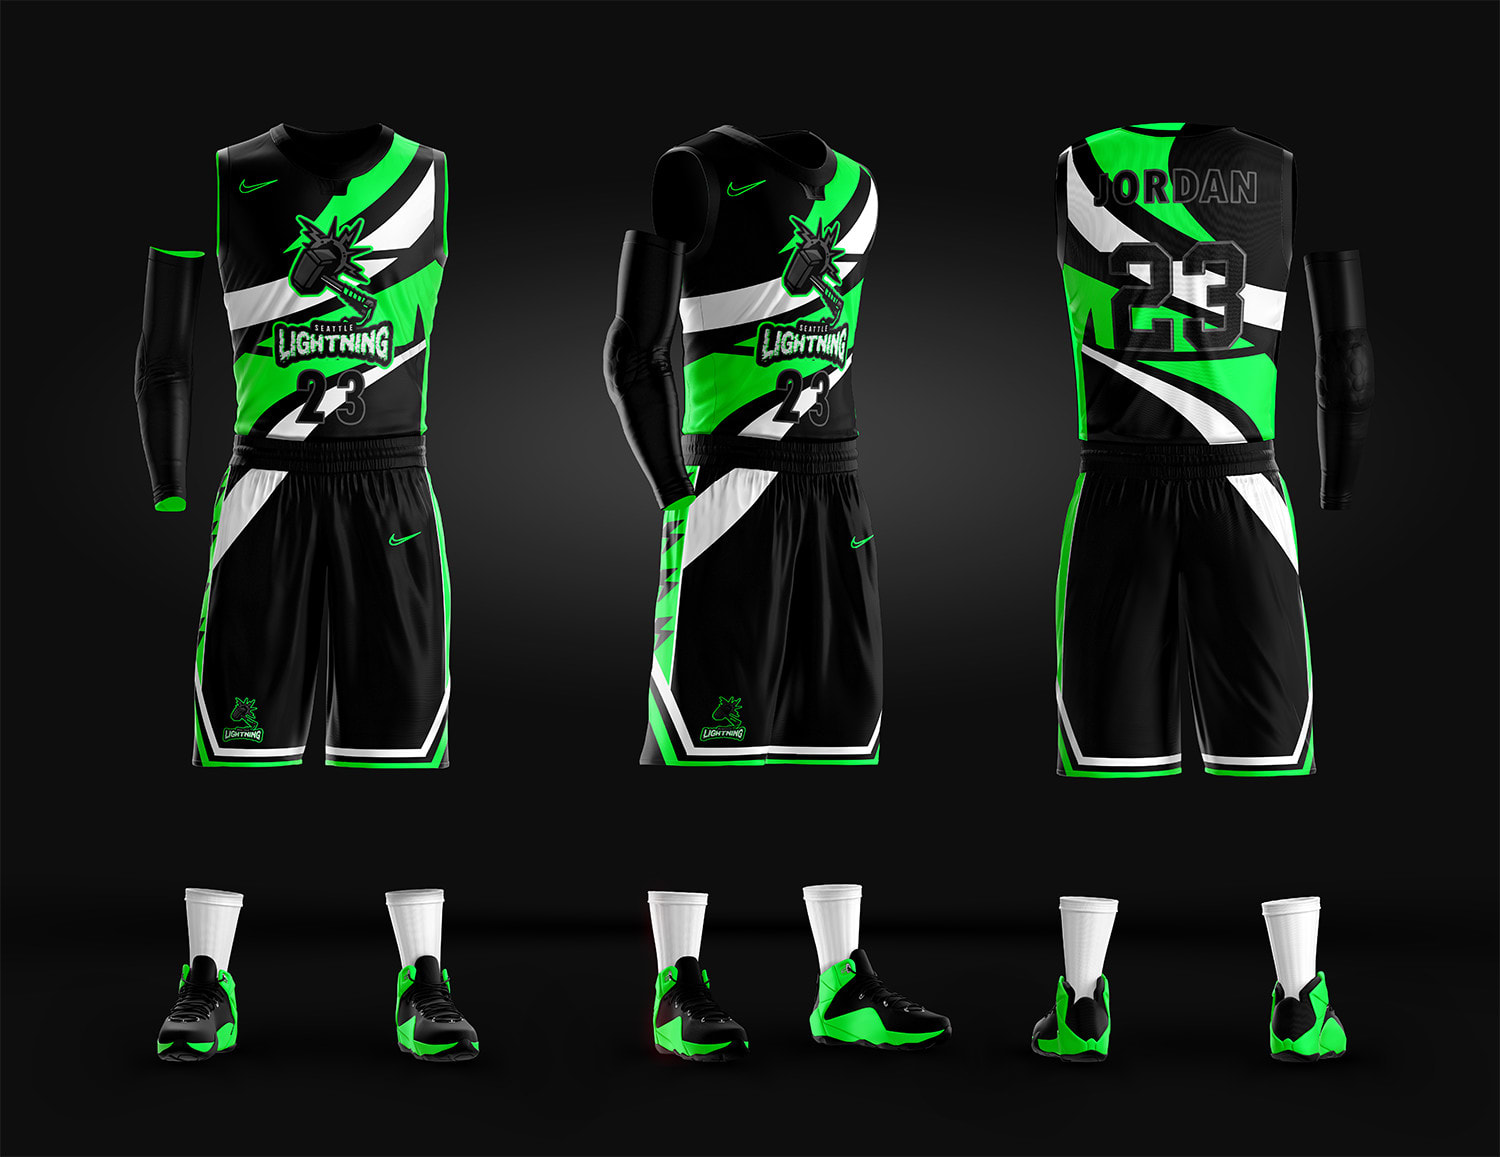 Make nba2k video game jerseys for pro am by Oneshopstop